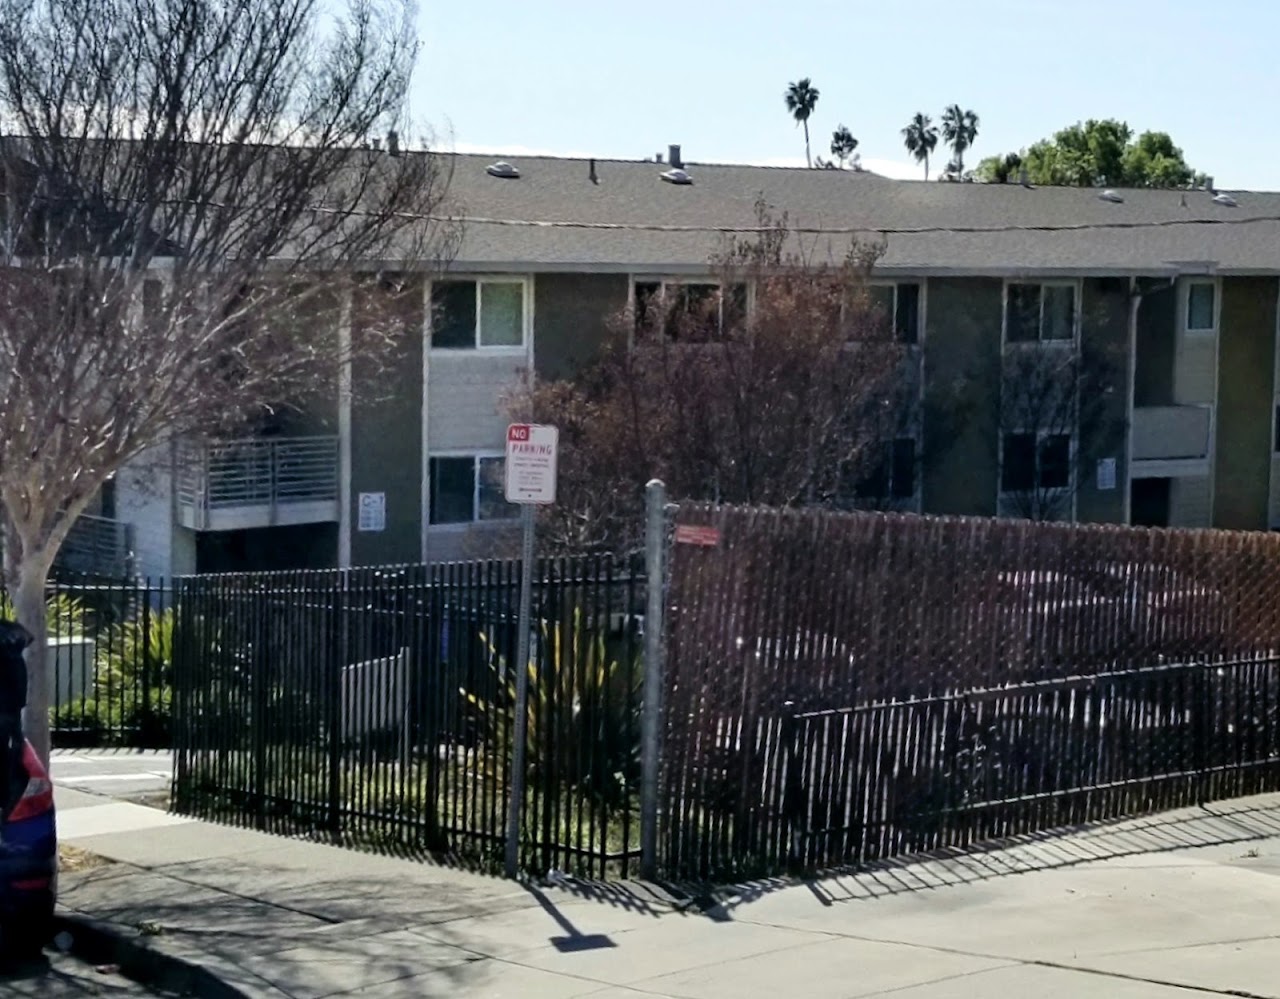 Photo of EDEN HOUSE APARTMENTS. Affordable housing located at 1601 165TH AVE SAN LEANDRO, CA 94578